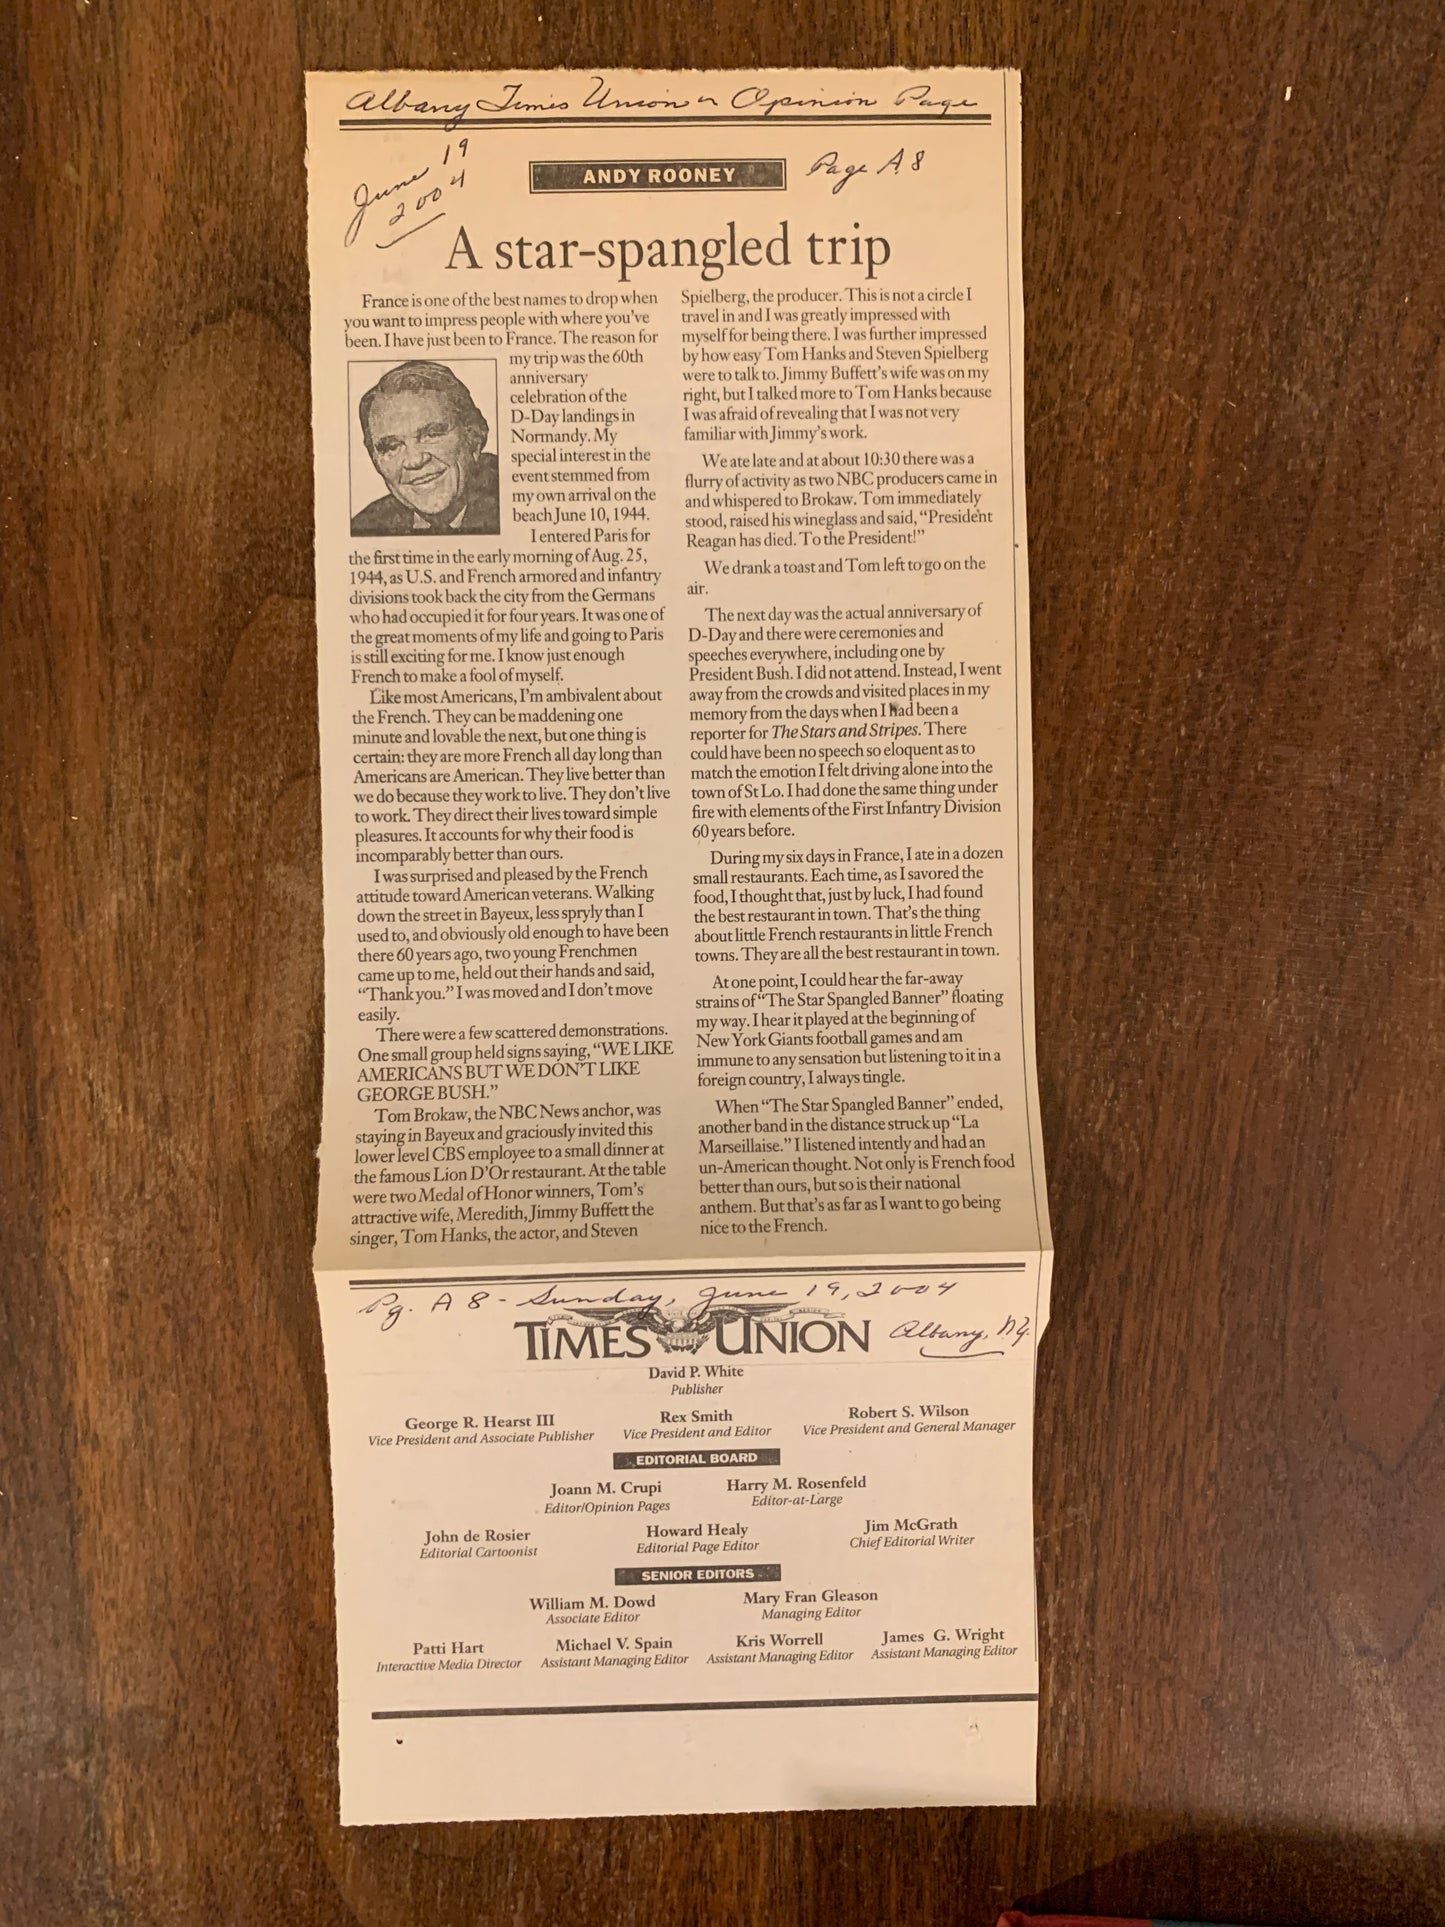 And More by Andy Rooney 1982 w/ Newspaper clippings